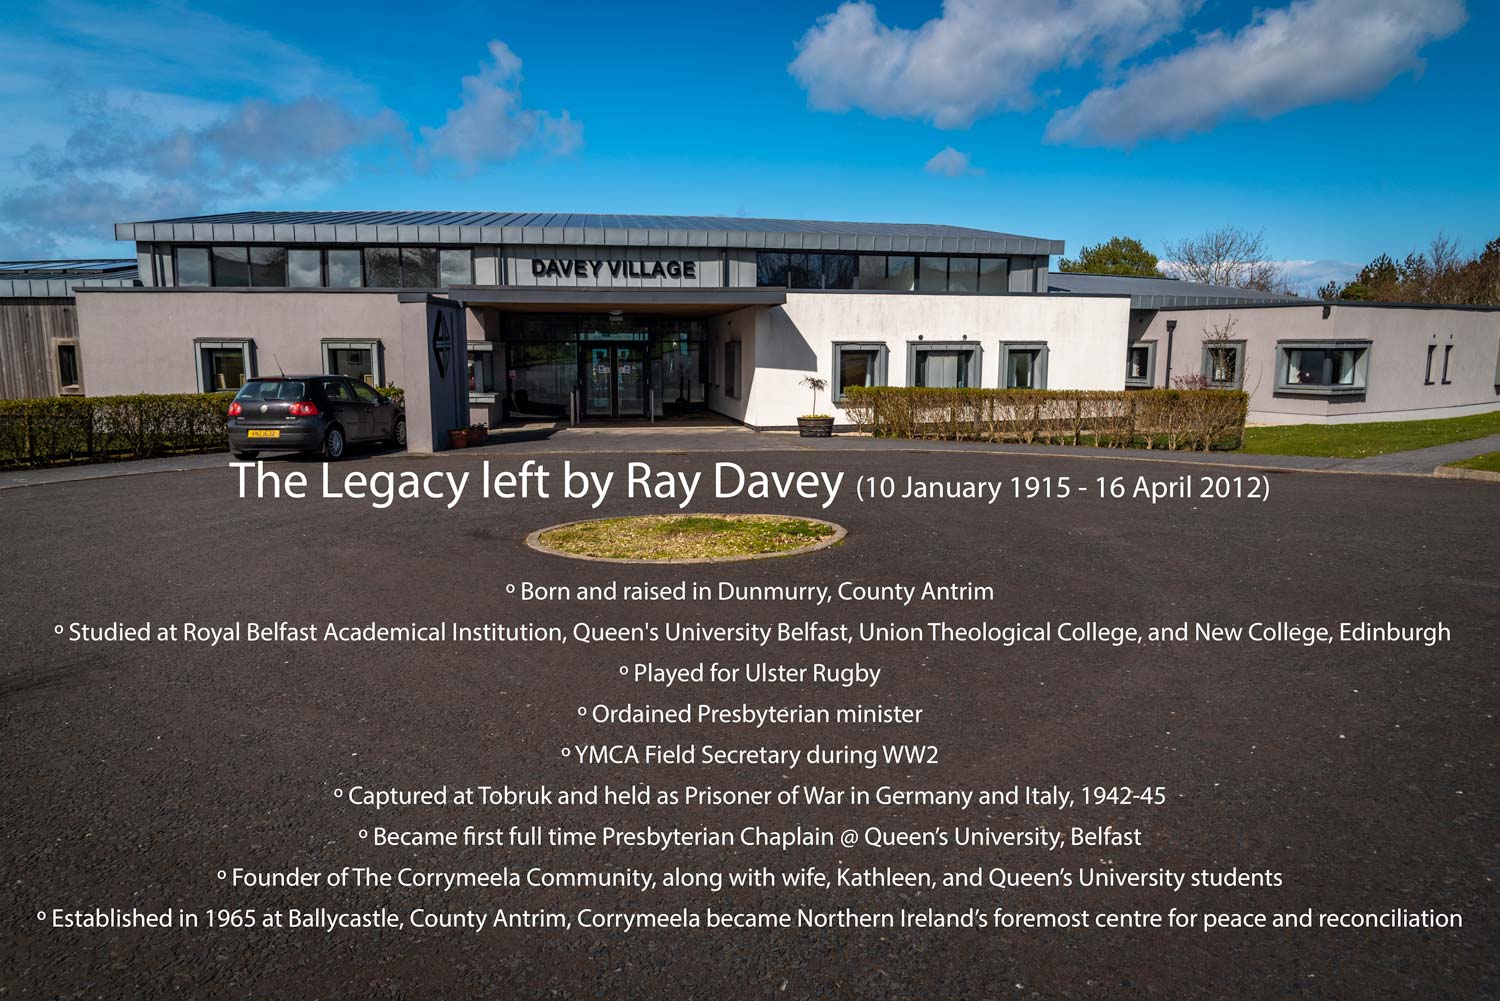 Davey Village is part of the Corrymeela Campus at Ballycastle, County Antrim, and is dedicated to the memory of founders' Ray and Kathleen Davey. Today, 16th April 2022, marks the 10th anniversary of Ray's passing. Below is an audio interview with Ray from the 1980's when he was interviewed by John Callister as research for a BBC documentary